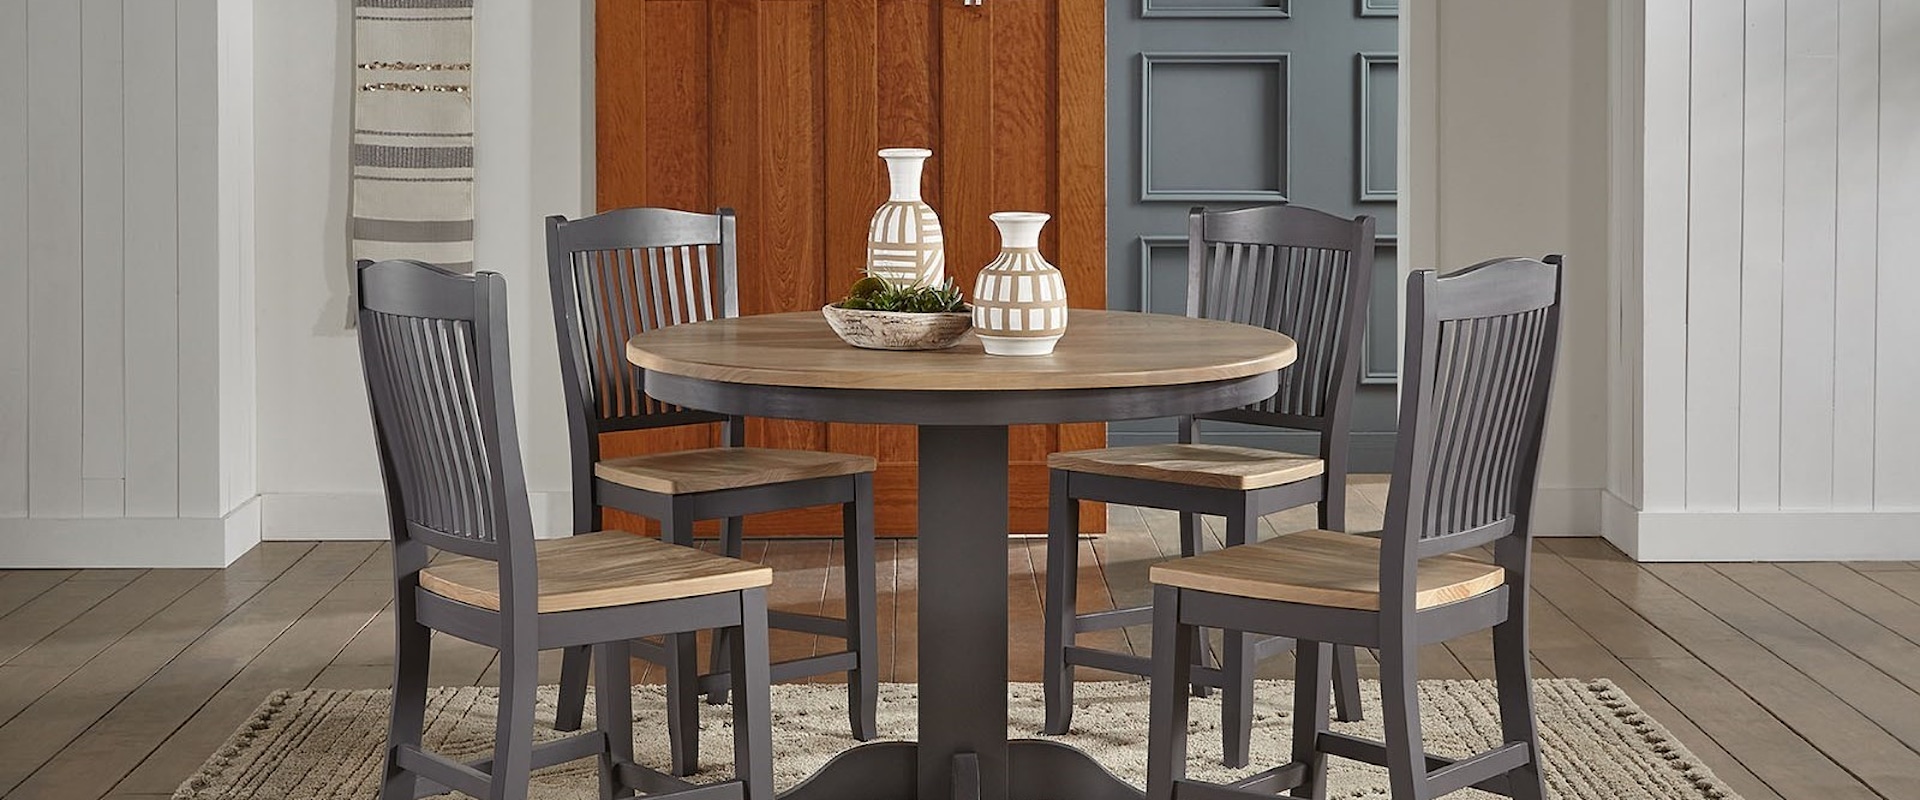 5-Piece Round Gathering Height Table and Chair Set